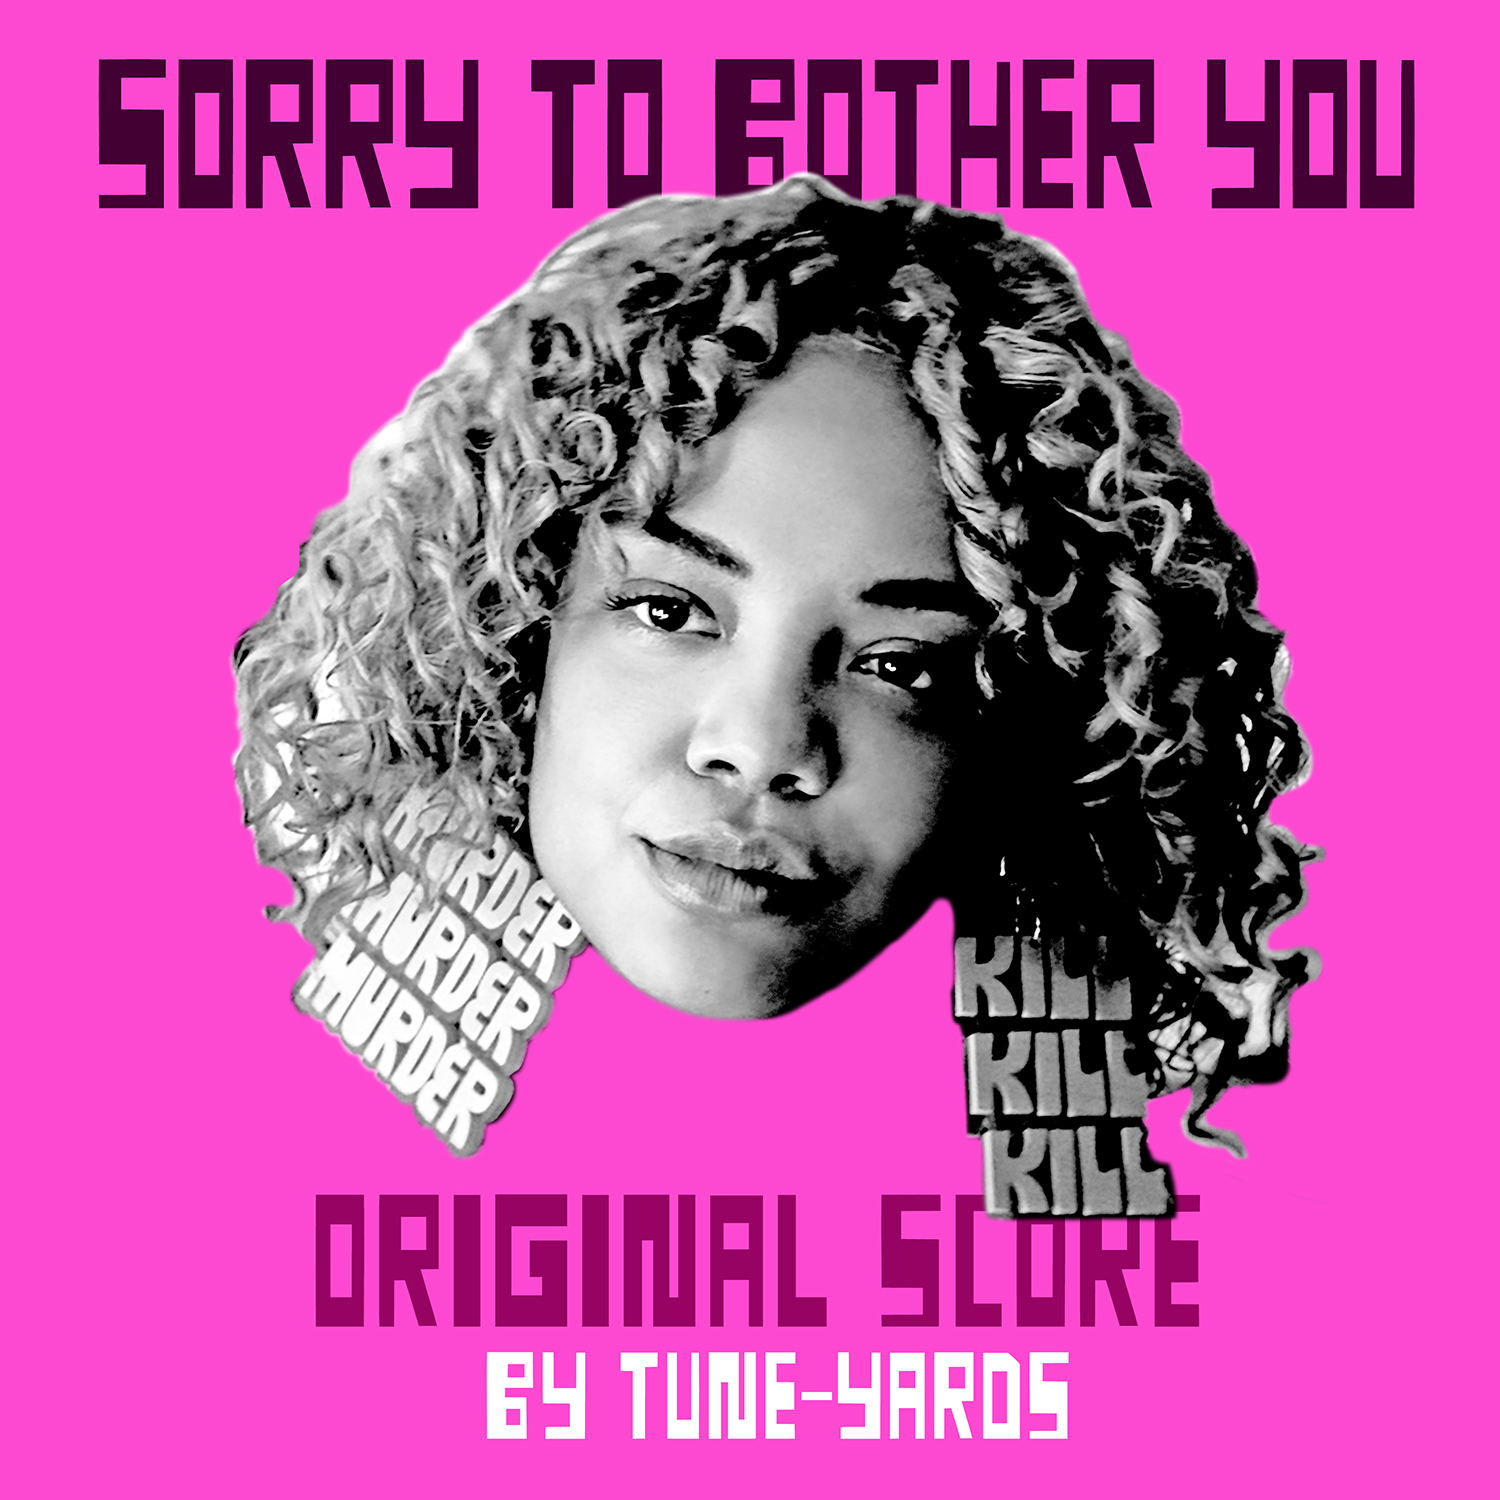 Tune-Yards, have released the original score for Boots Riley’s acclaimed 2018 film Sorry To Bother You starring Lakeith Stanfield and Tessa Thompson